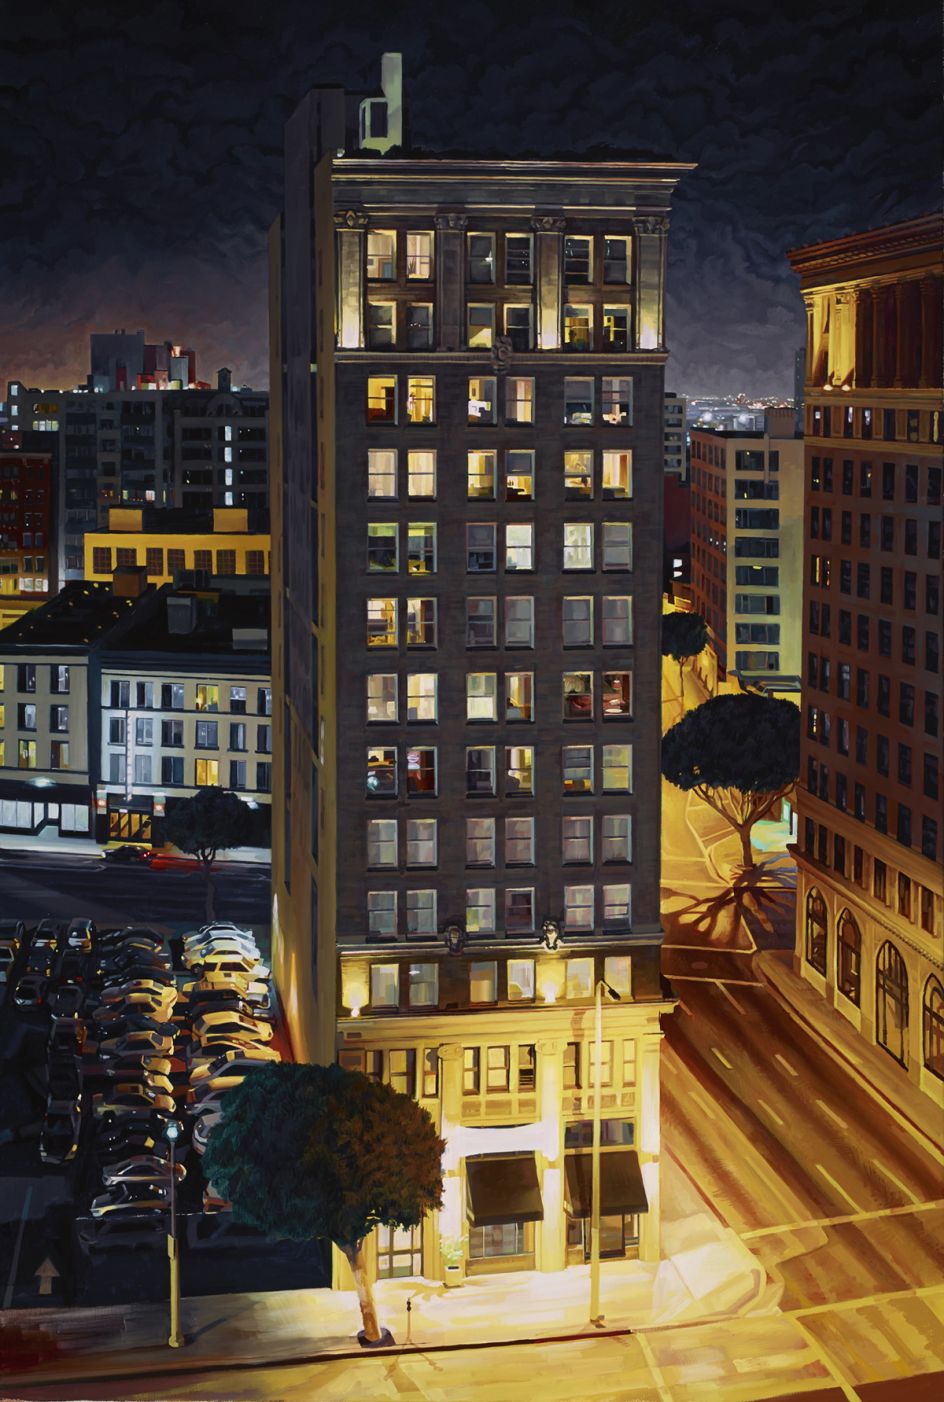 Spring St. - Oil on canvas, 2015